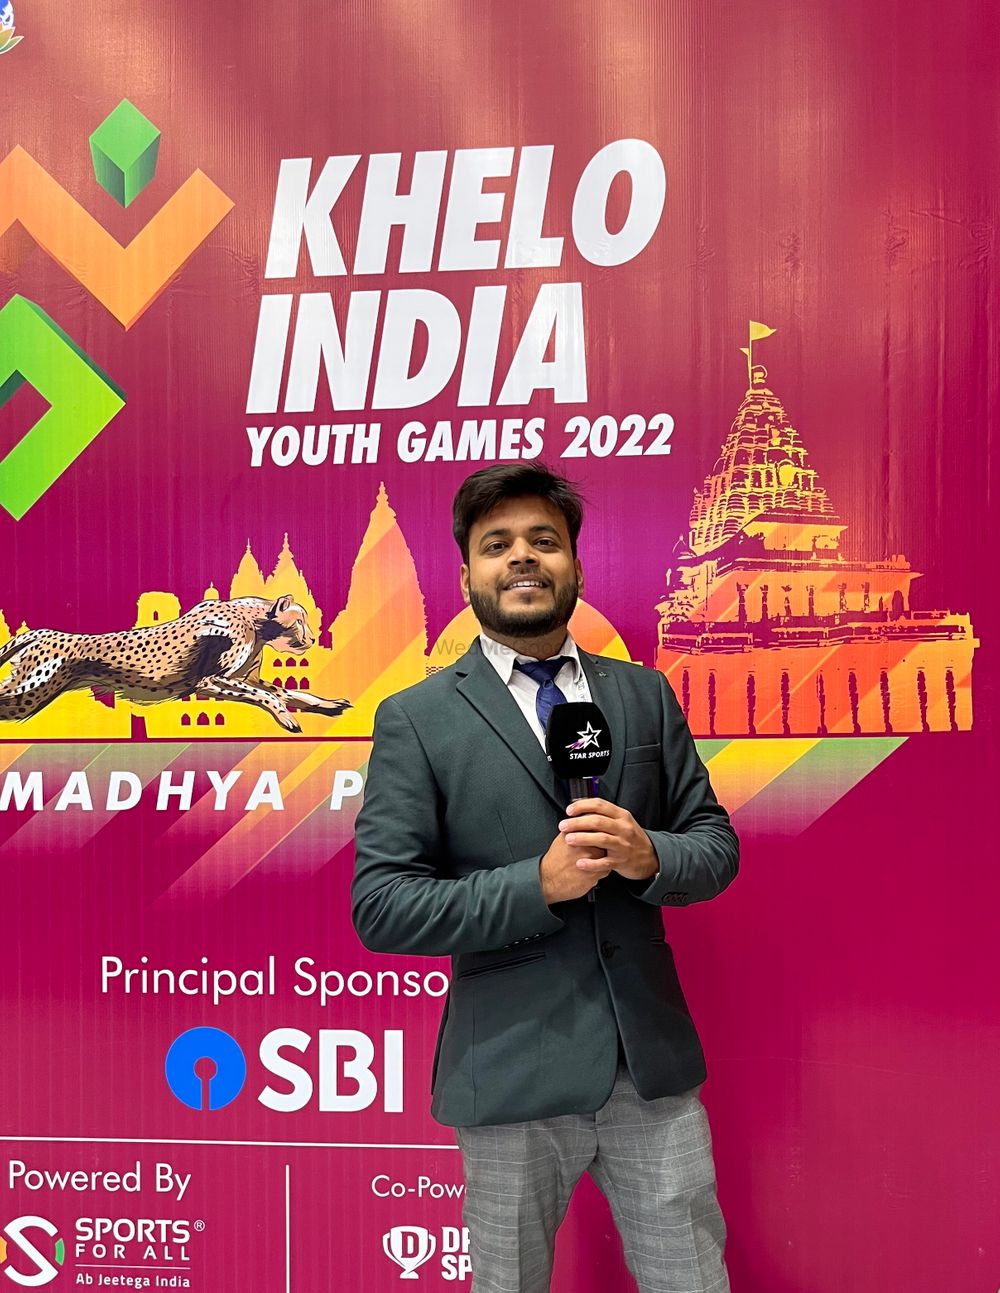 Photo From khelo india youth games Token of appreciation - By Anchor Rajeev Thada